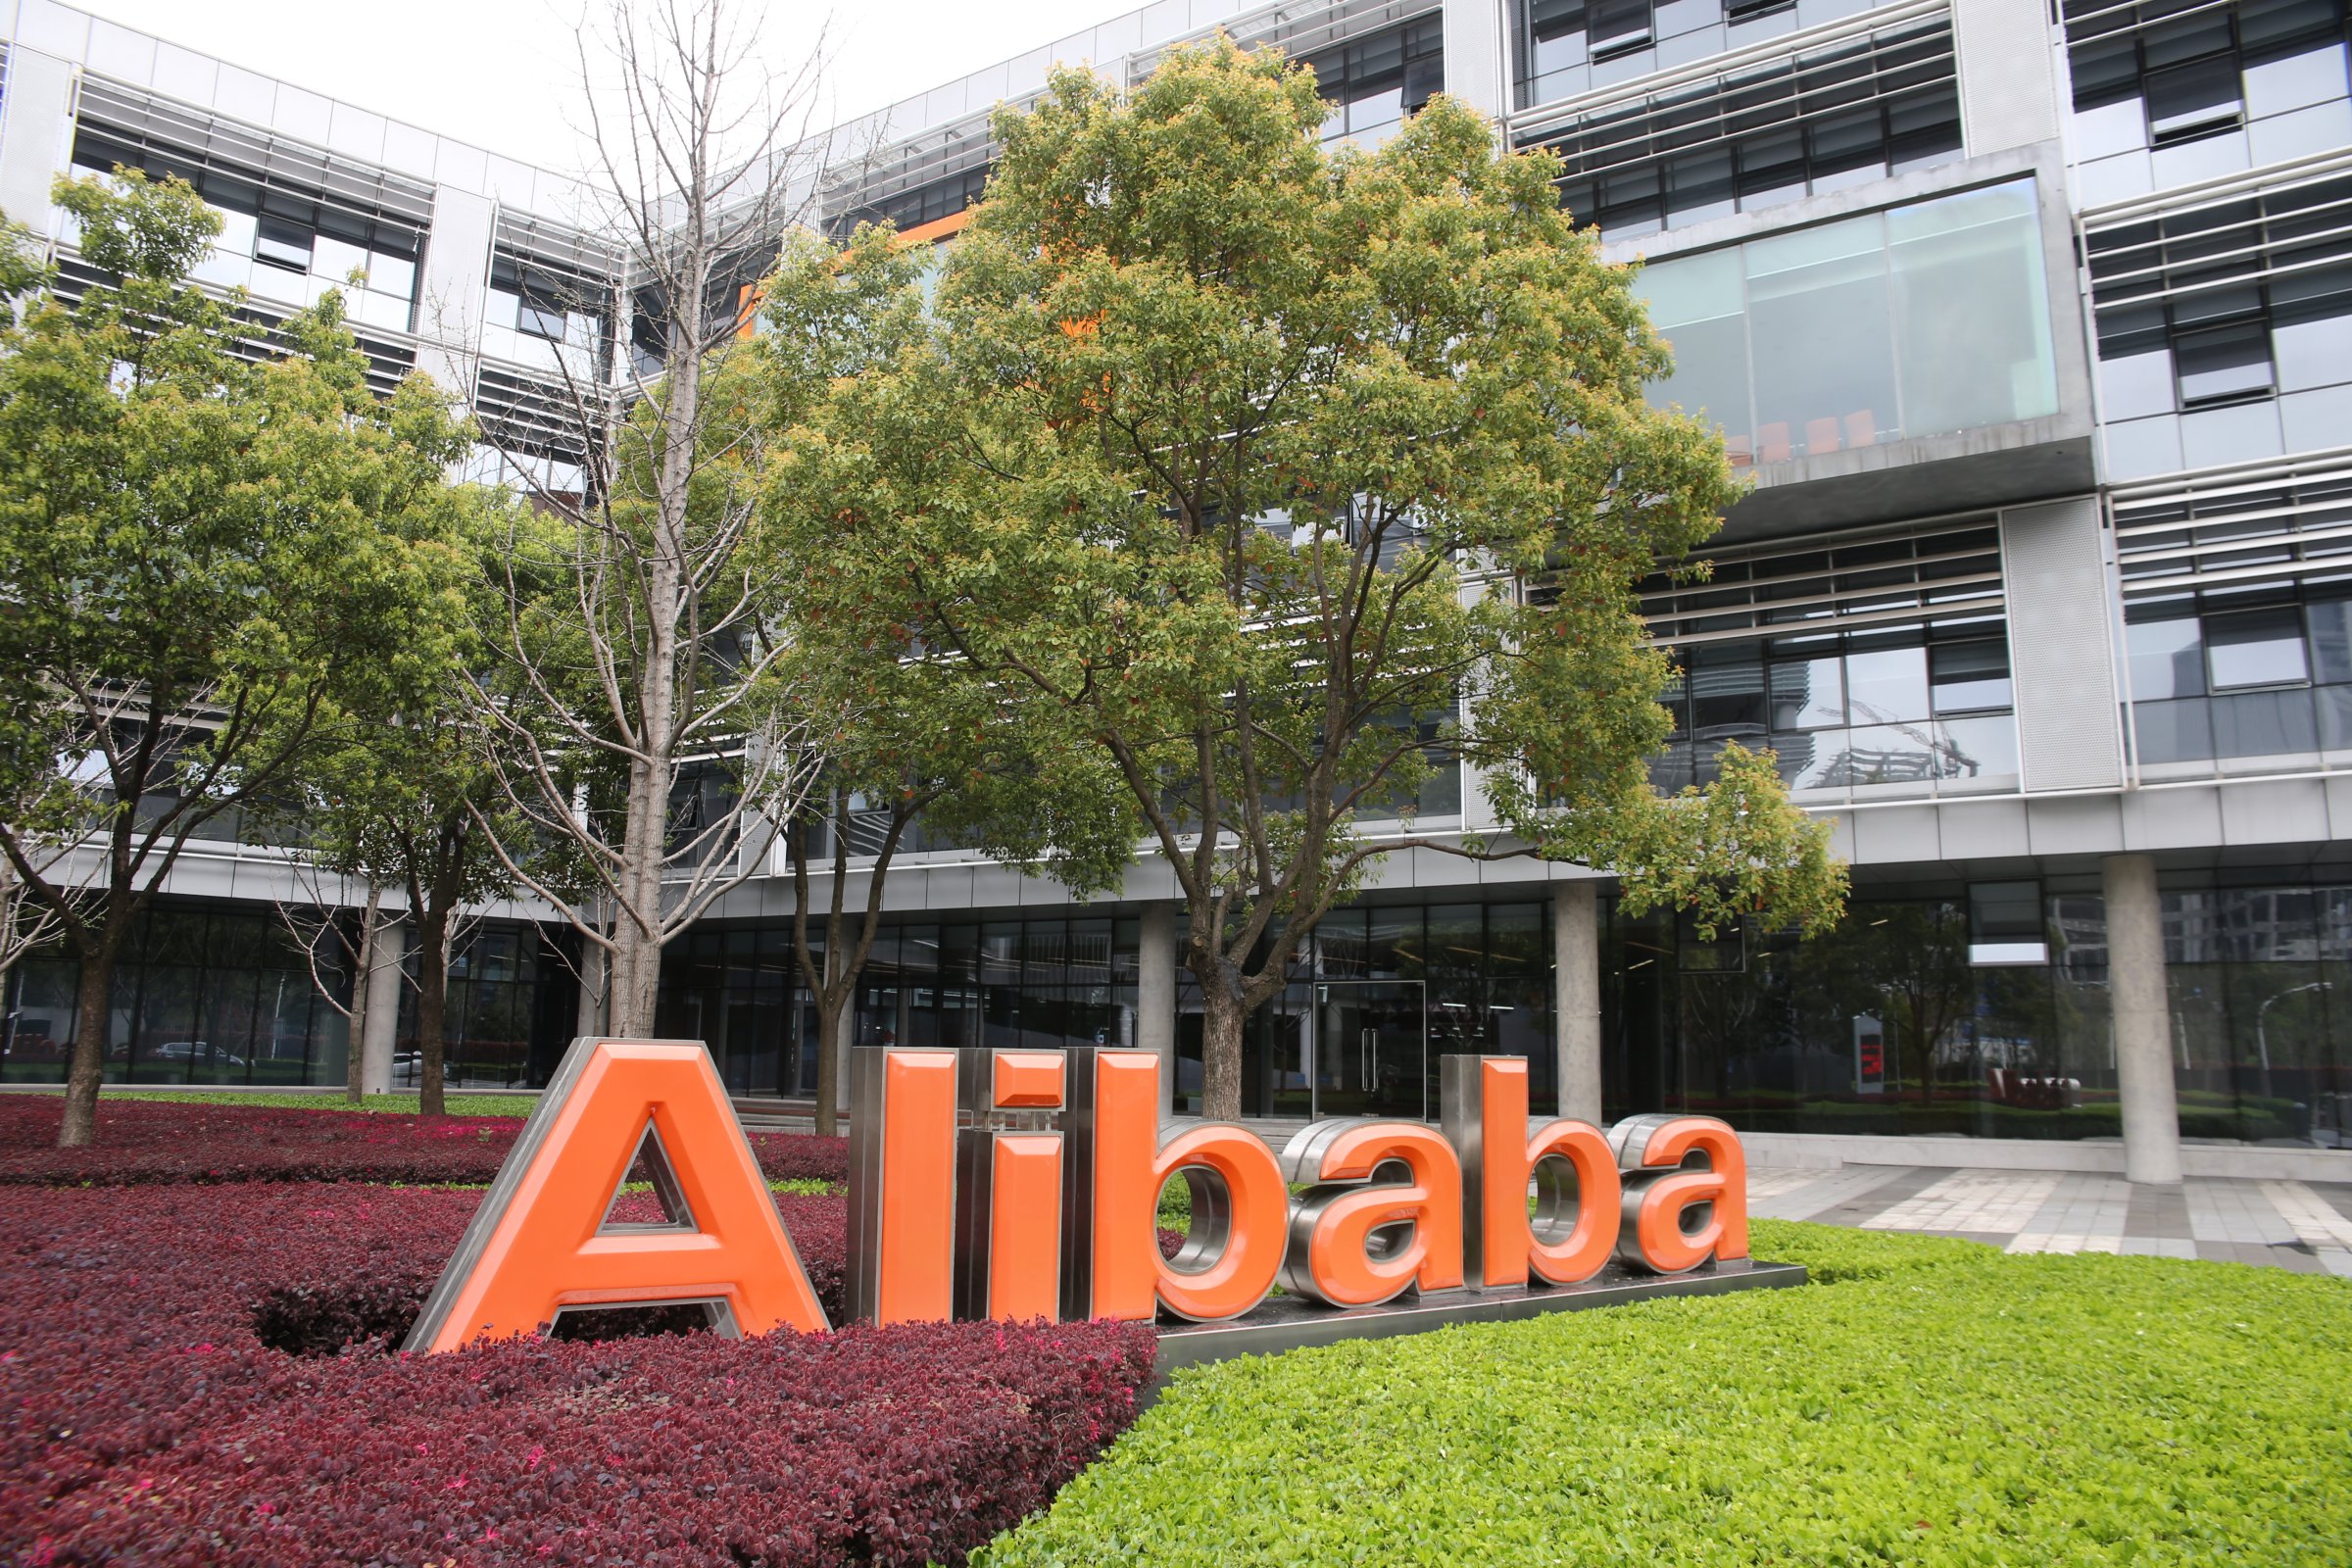 libaba Group headquarters on March 29, 2014 in Hangzhou, China.